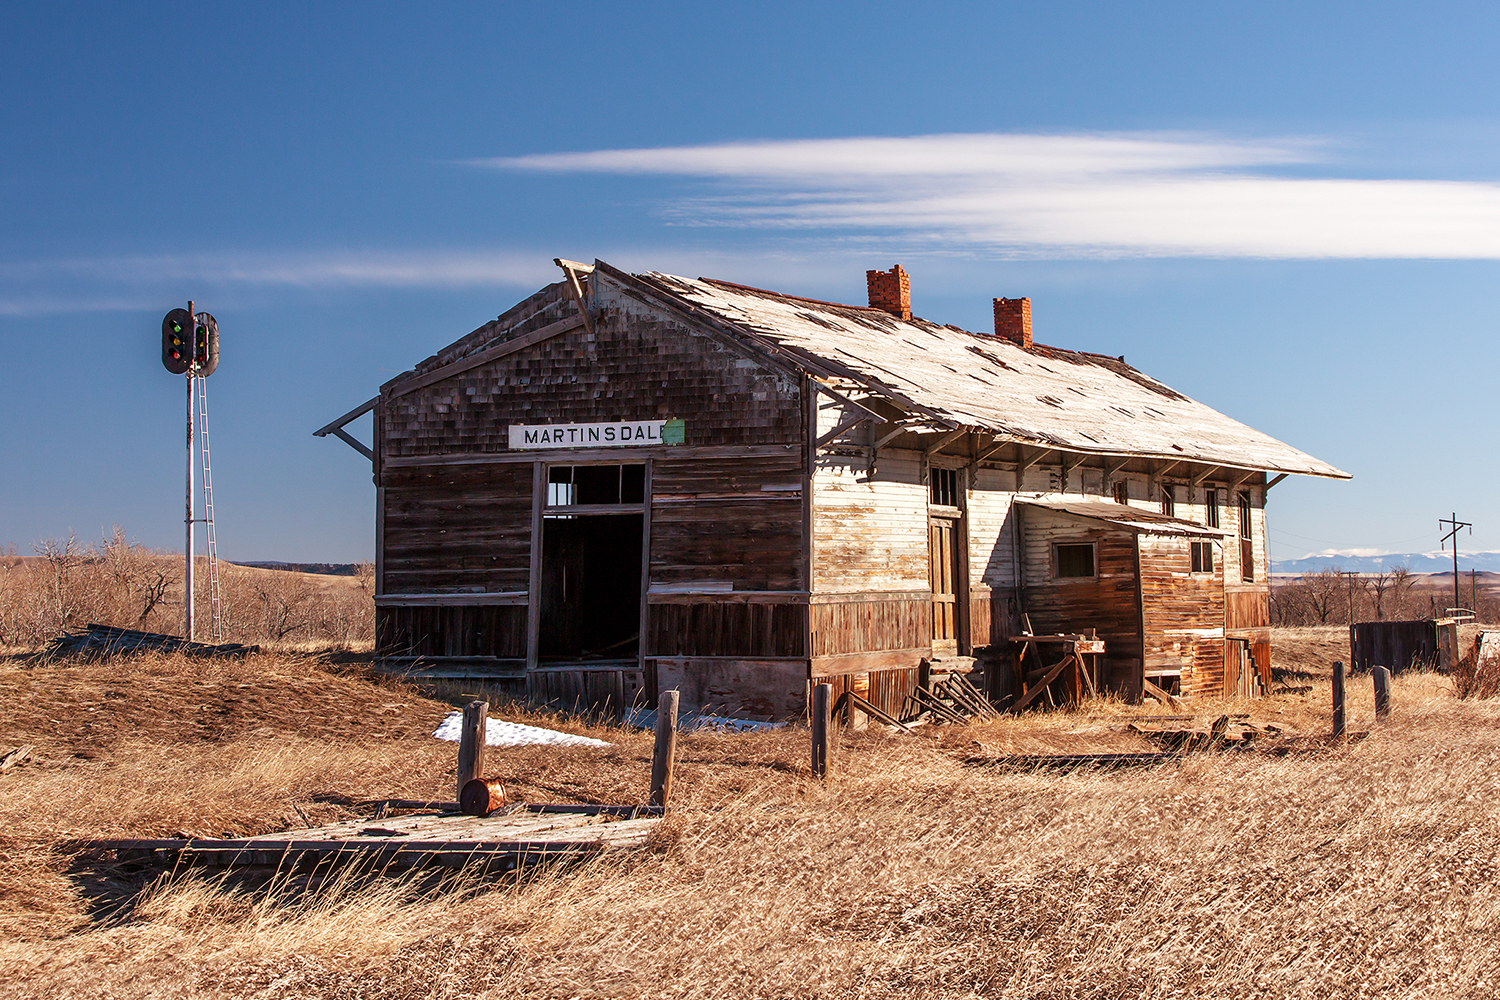 Another Montana landmark will be torn down and lost forever